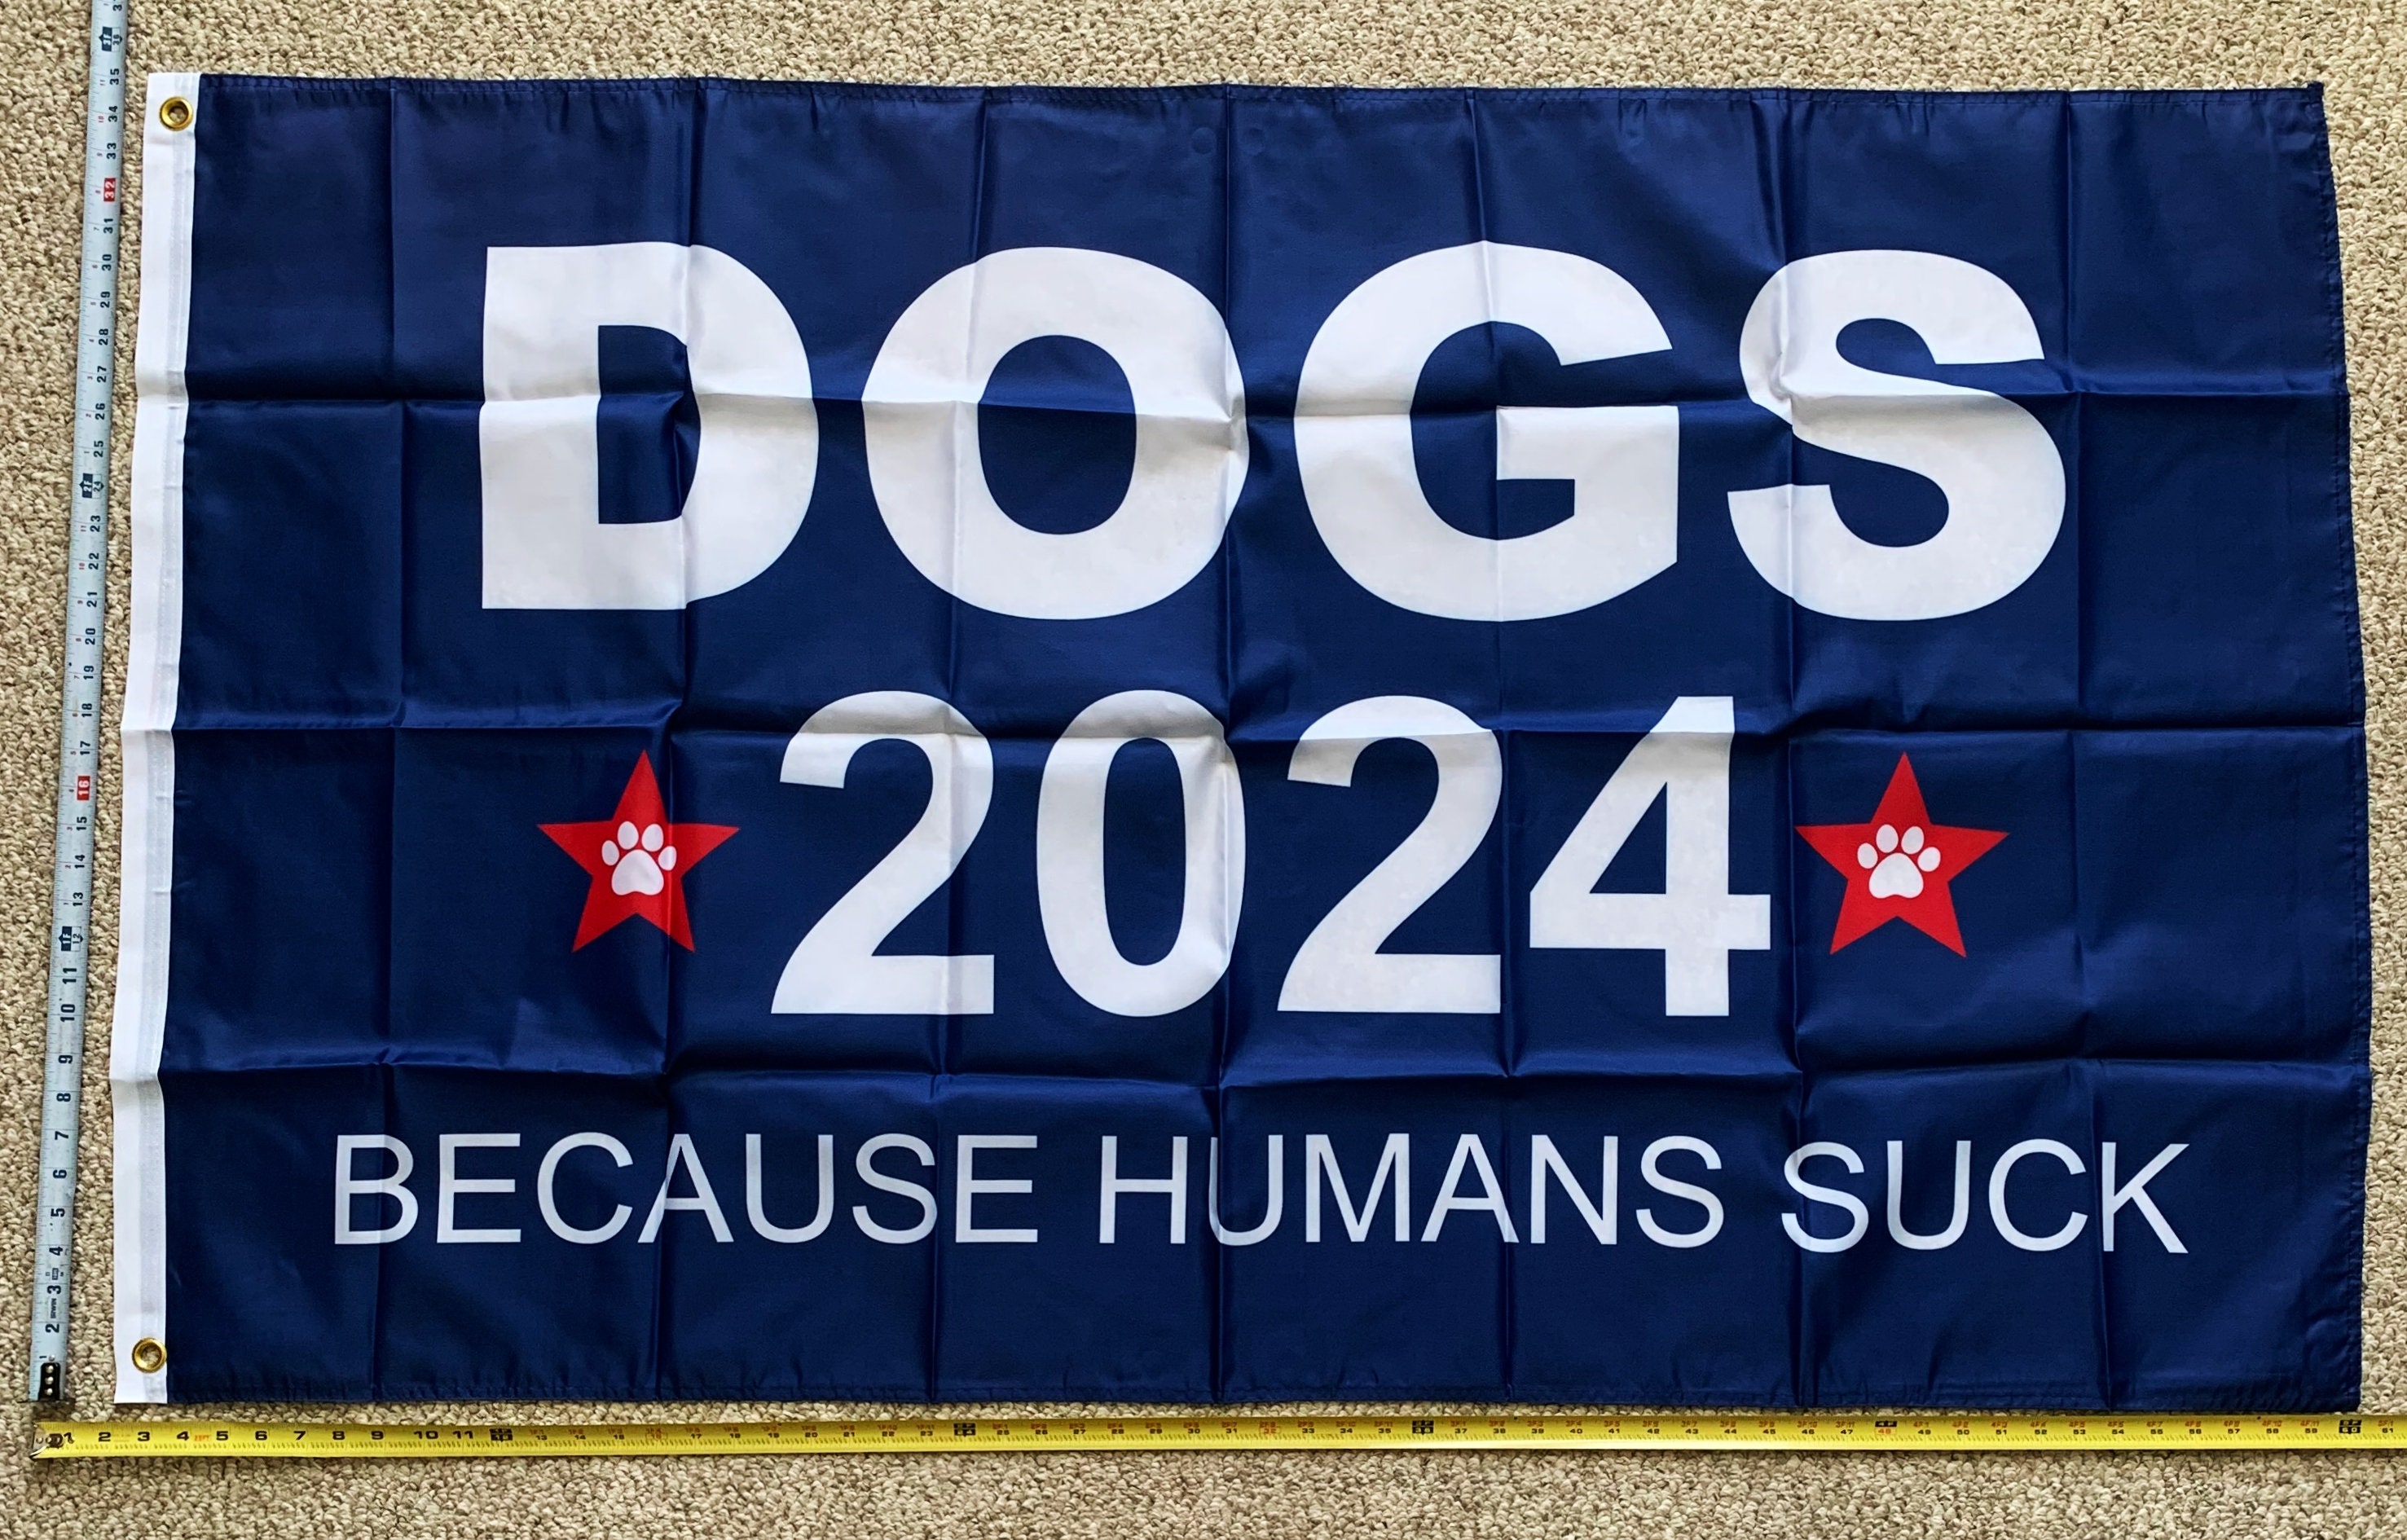 I Love Dogs Flag FREE SHIPPING Dogs 2024 Because Humans Suck Etsy